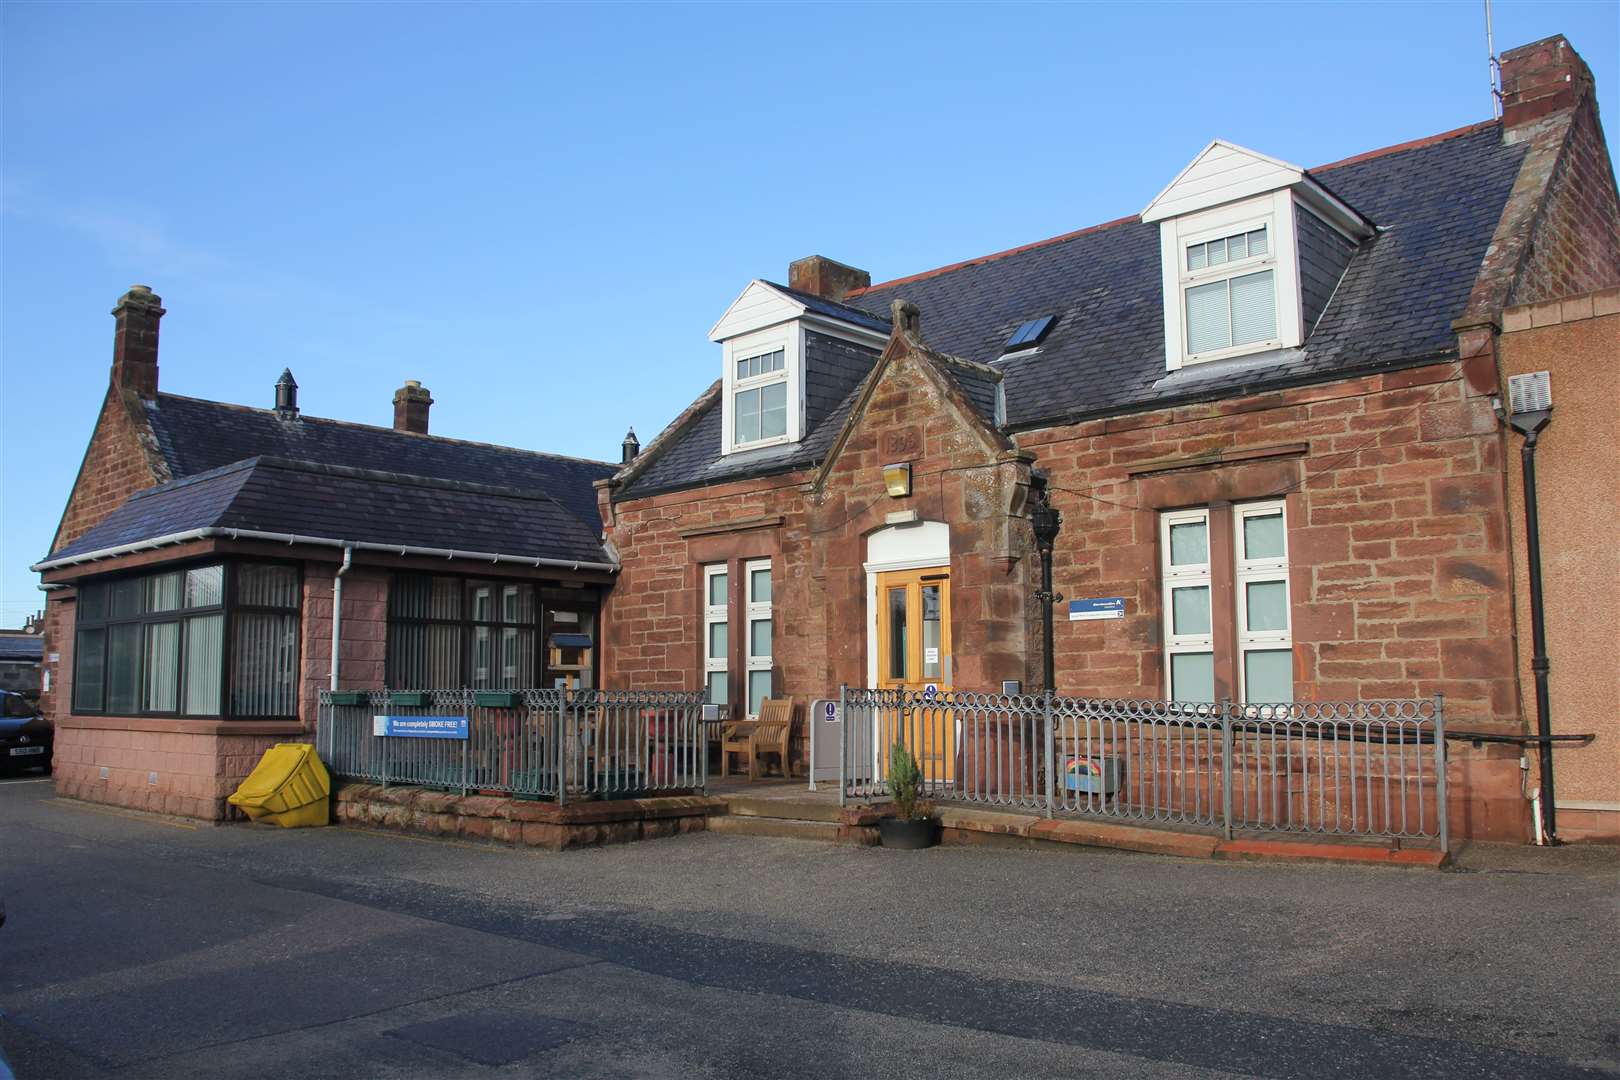 Concerns have been raised over access to the GP practice and the minor injury unit at Turriff.